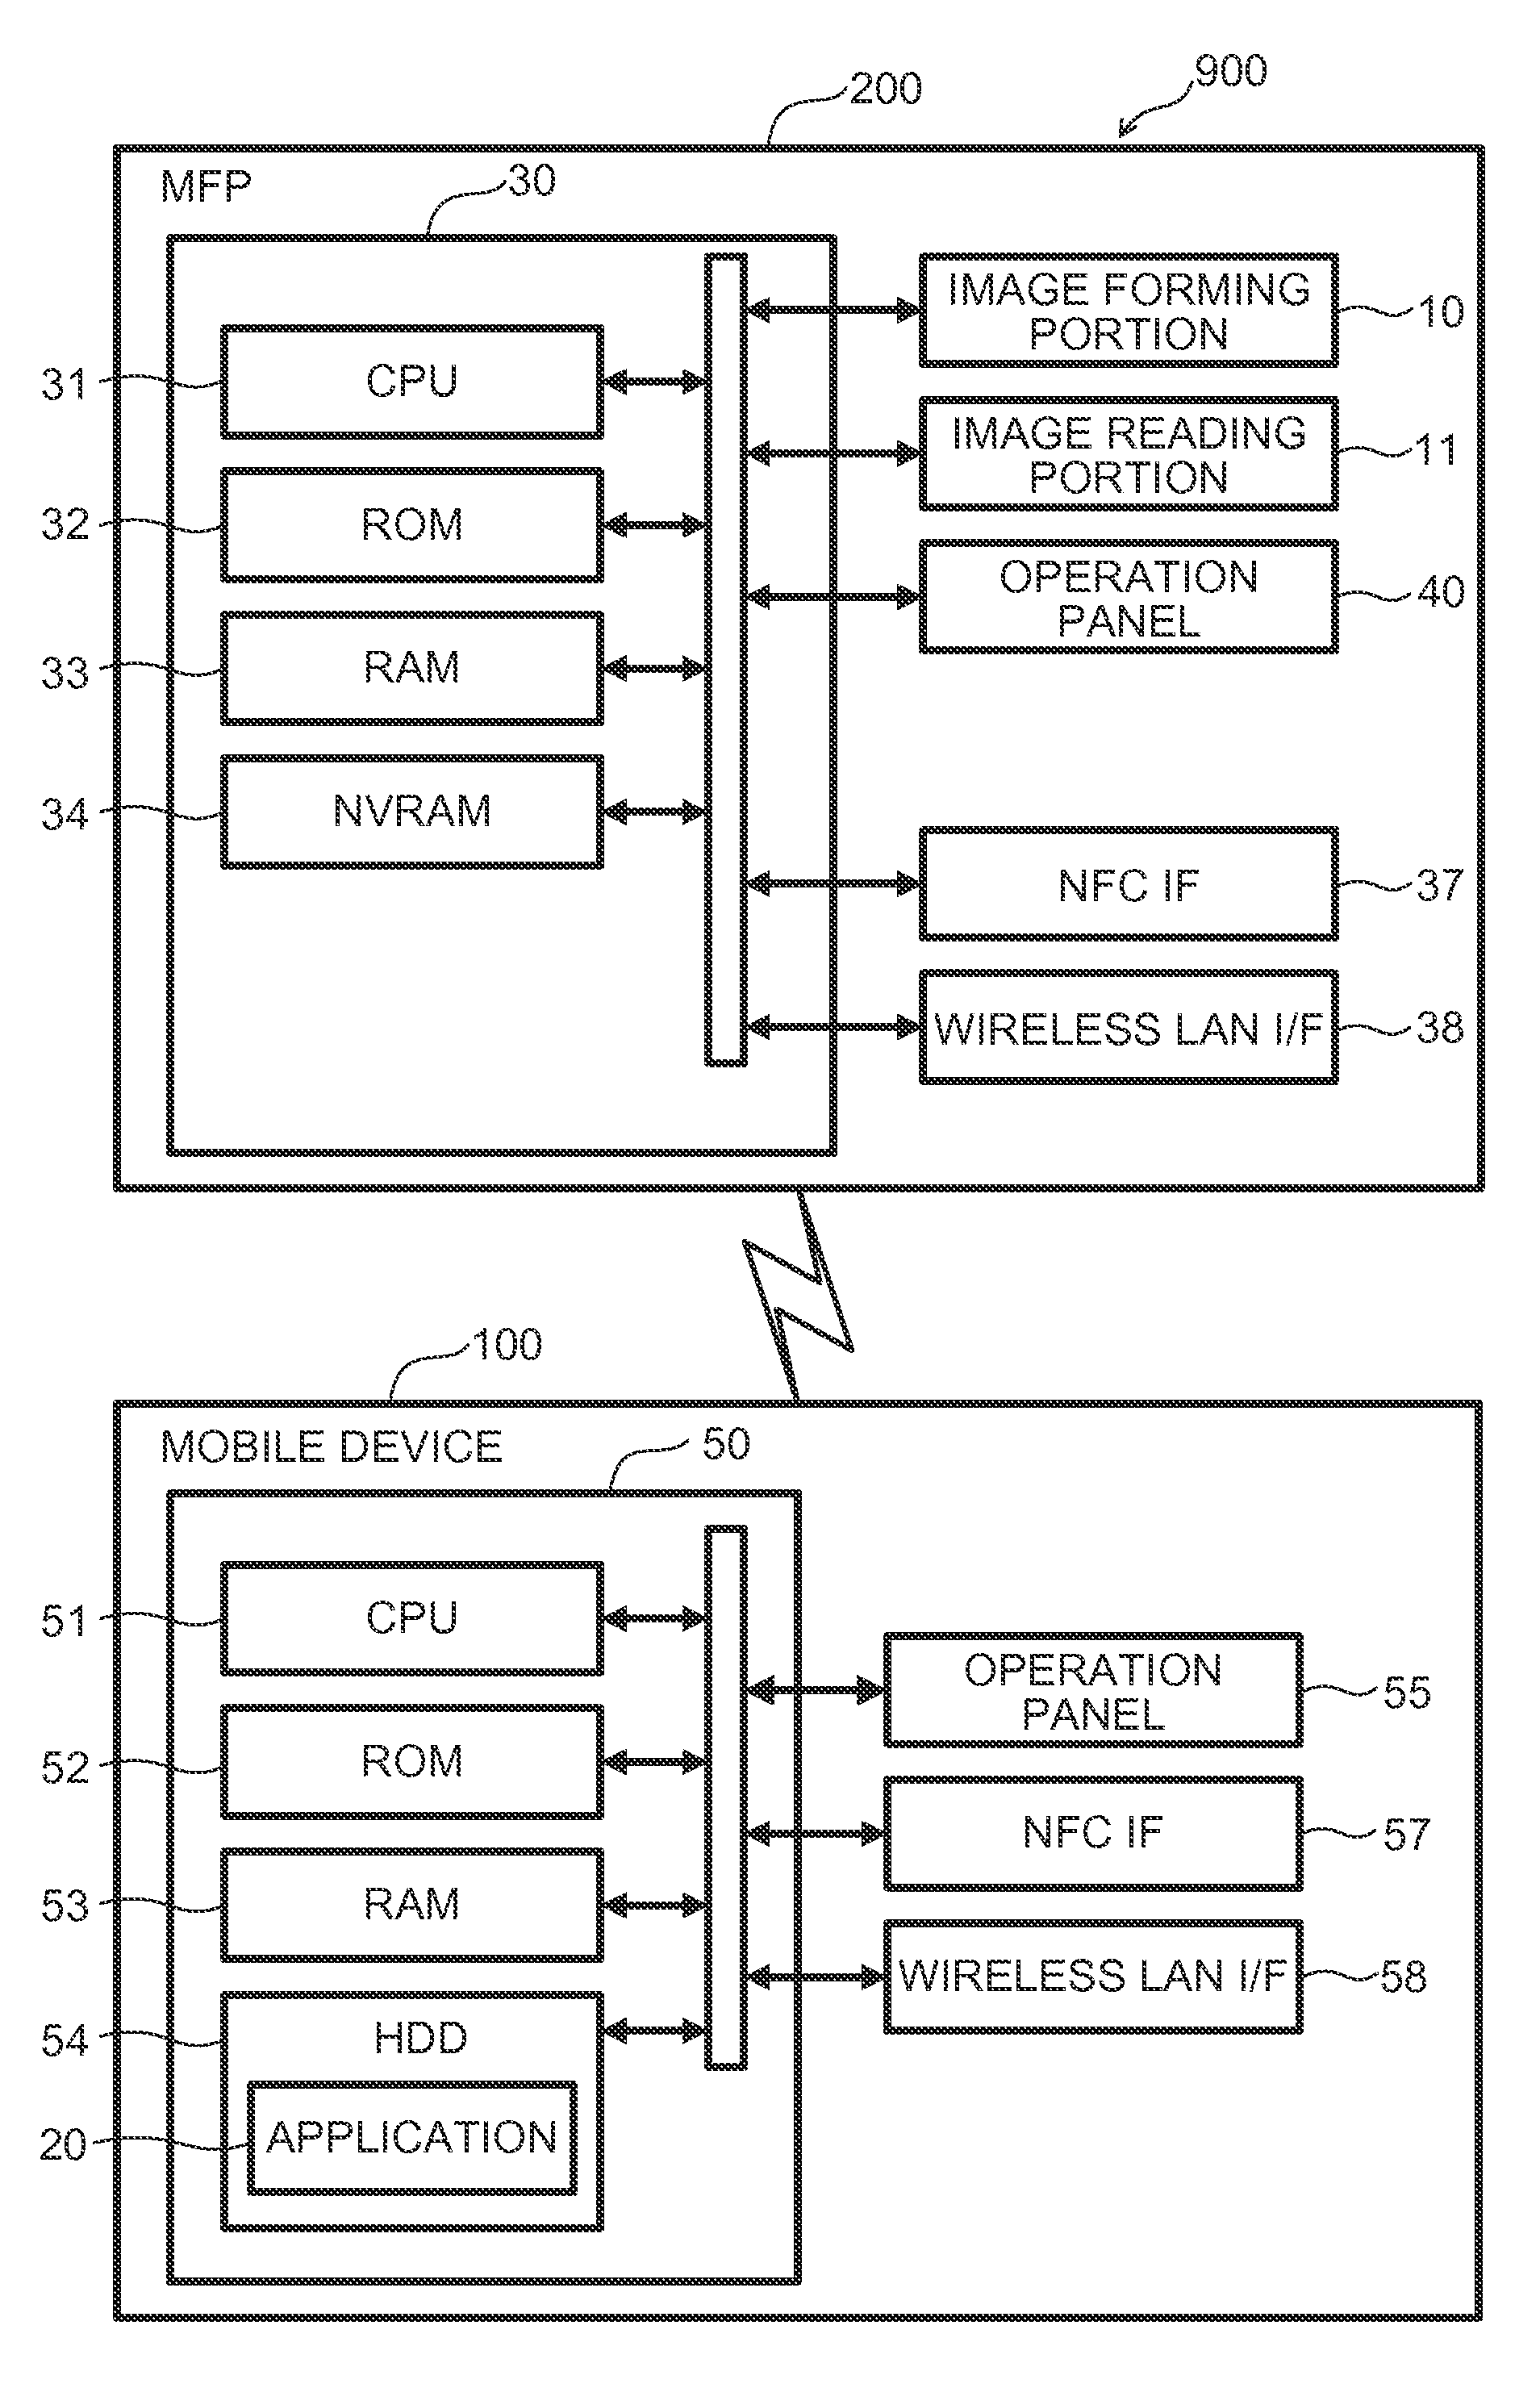 Image processing systems that establish connections using different communication protocols, data processing apparatuses that establish connections using different communication protocols, and computer-readable media storing instructions for such data processing apparatuses